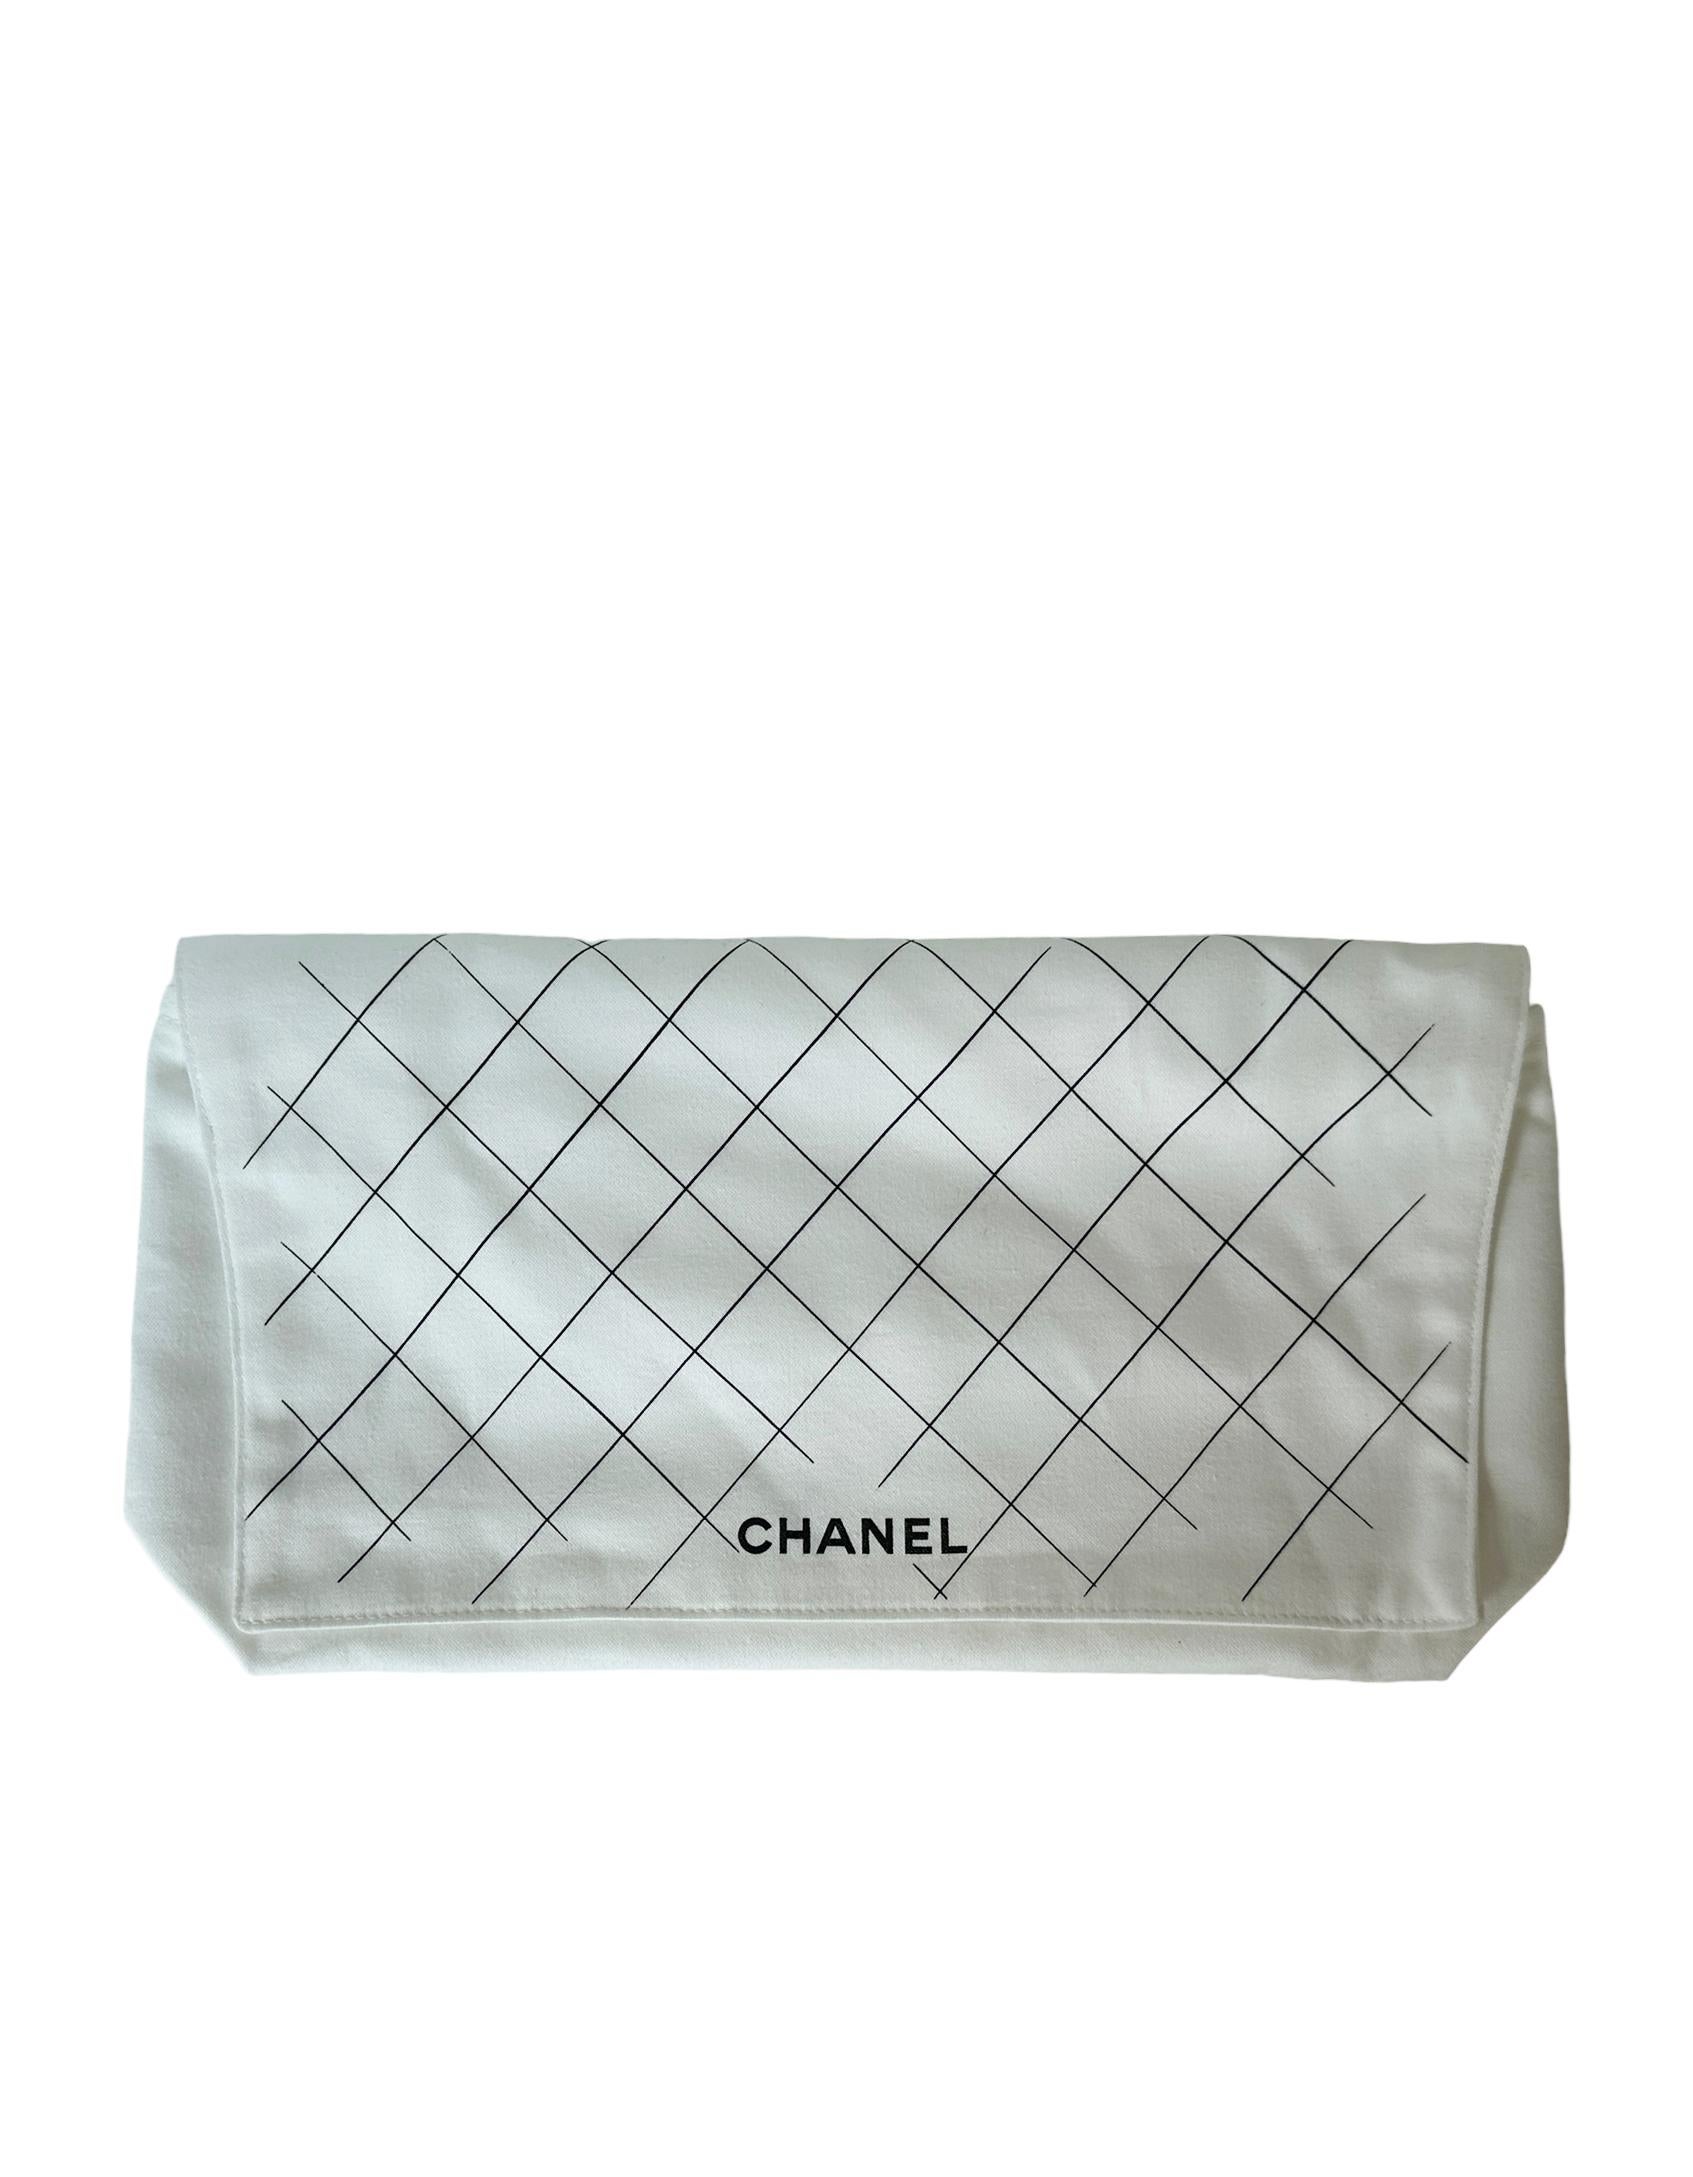 Chanel Metallic Navy Caviar Leather Quilted Medium Boy Bag   
Made In: Italy
Year of Production: 2022
Color: Metallic navy
Hardware: Goldtone
Materials: Caviar leather
Lining: Leather
Closure/Opening: Flap top with pushlock
Exterior Pockets: